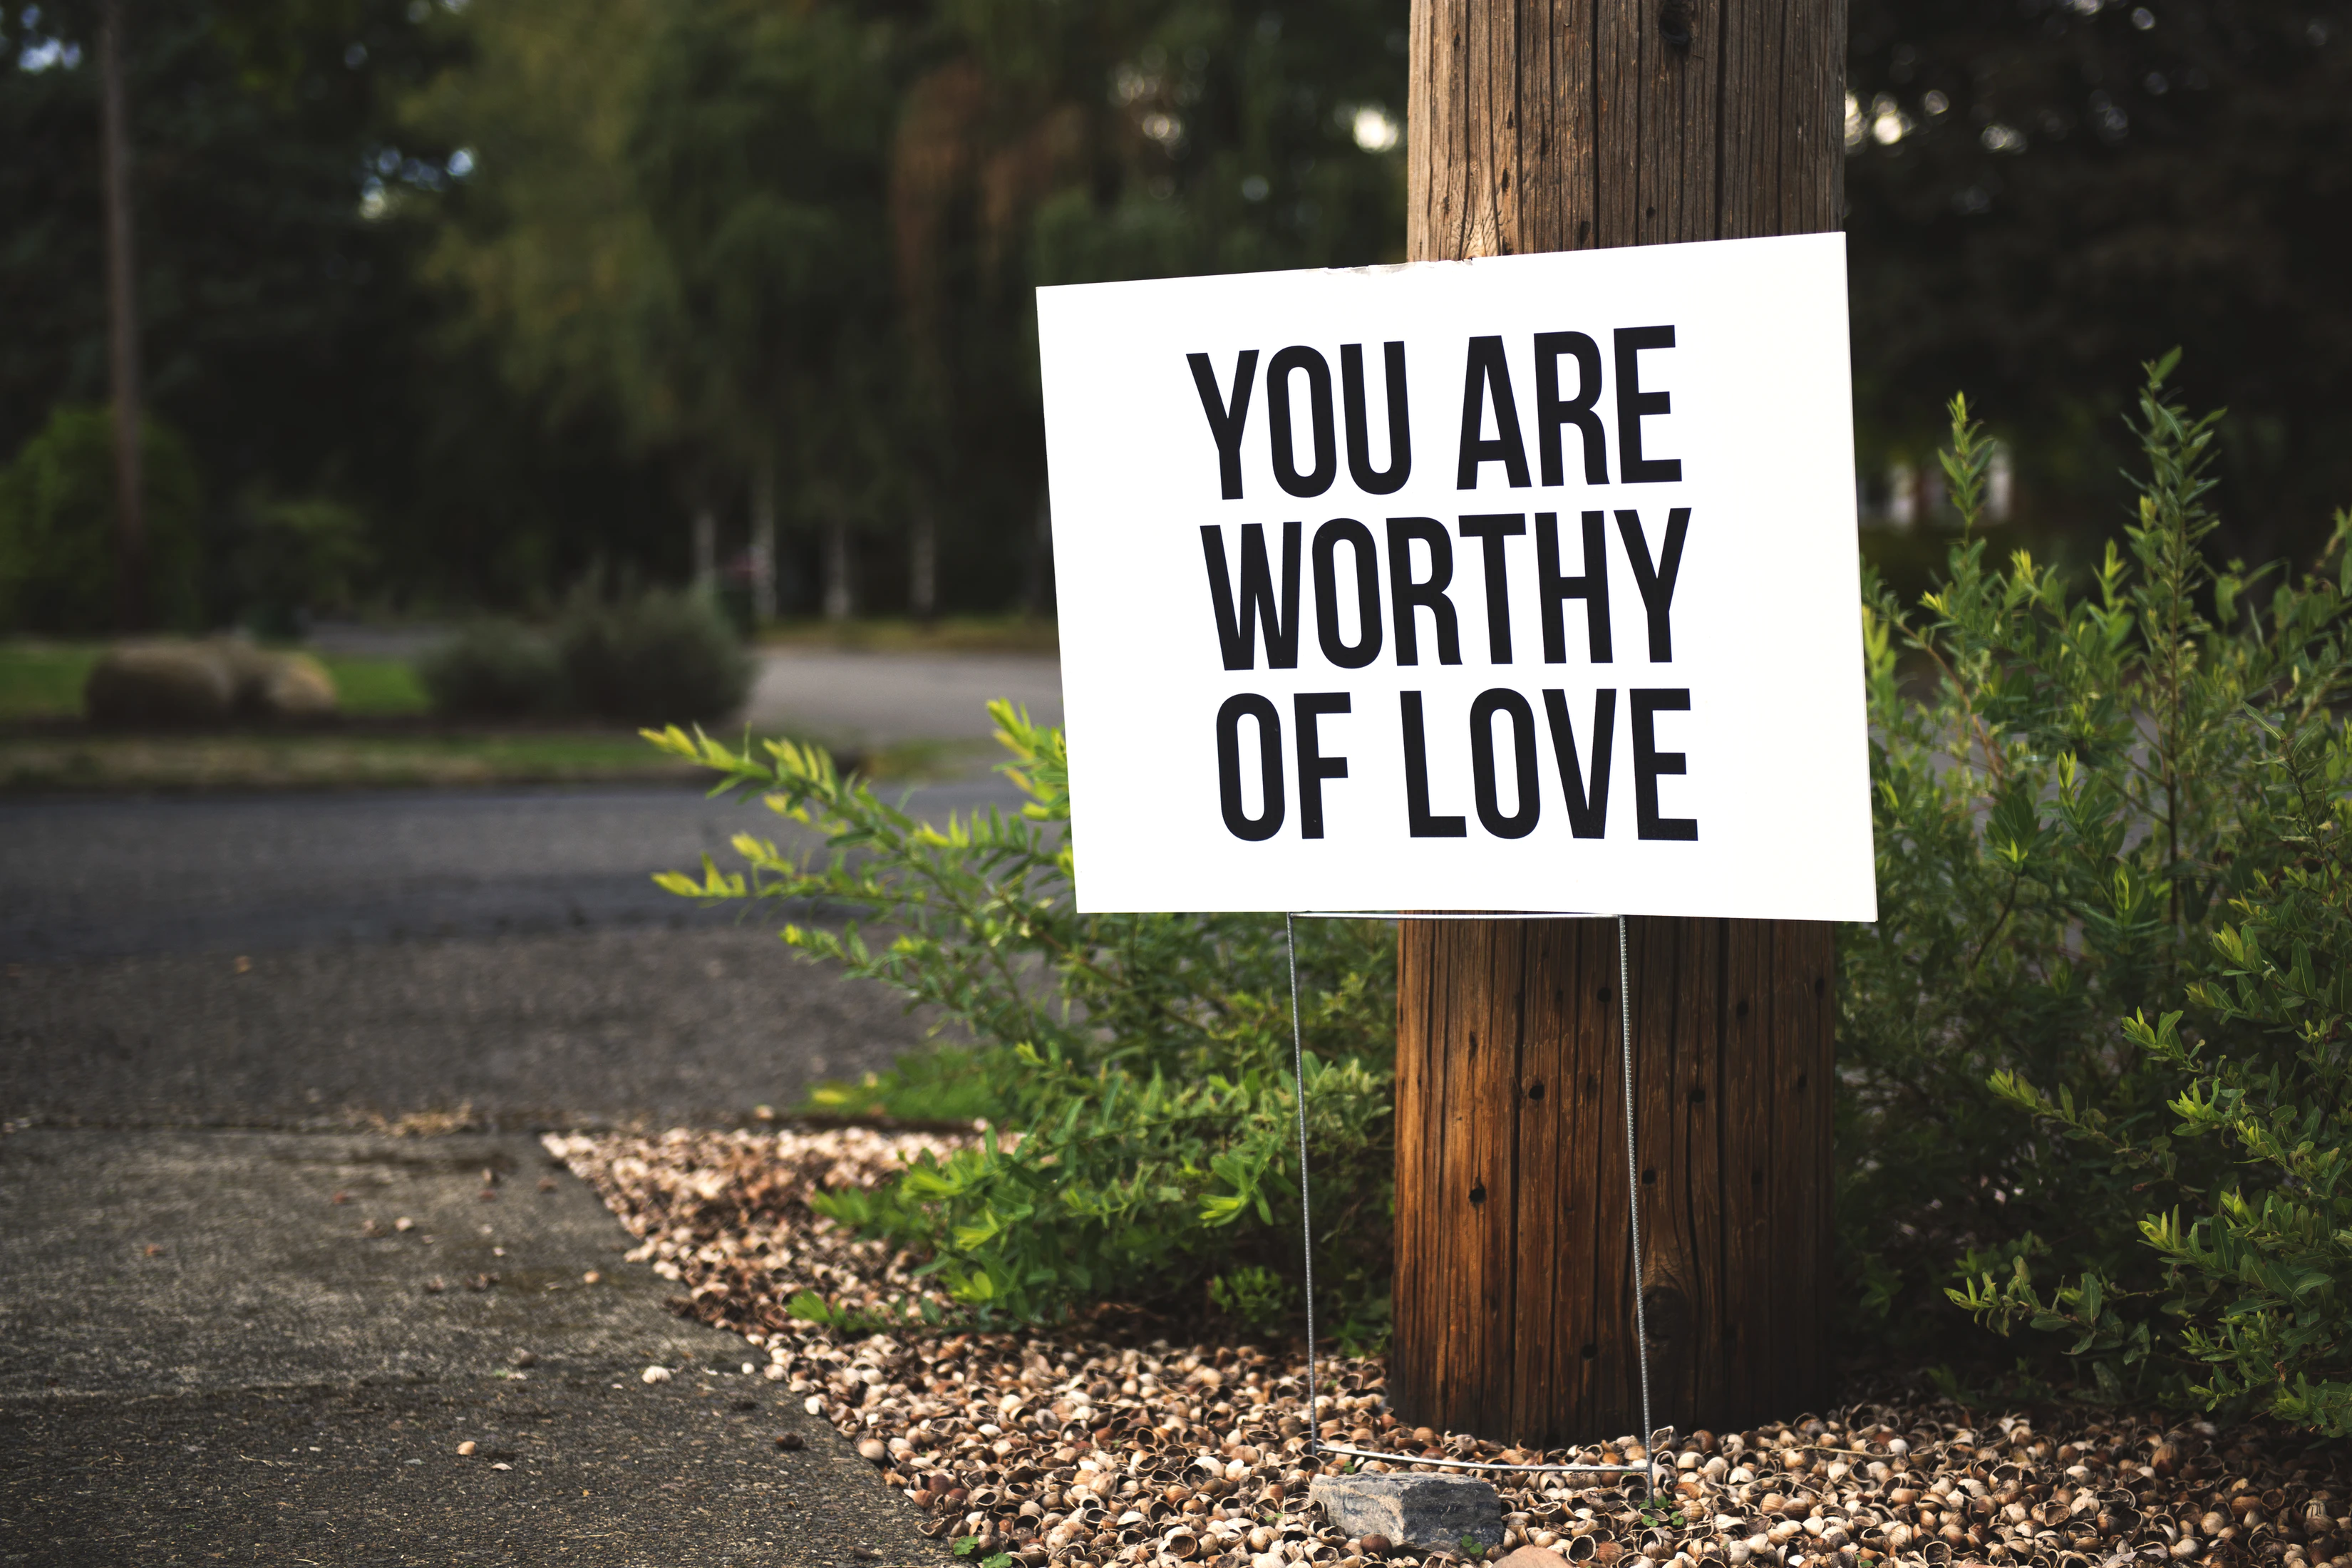 You are worthy of love